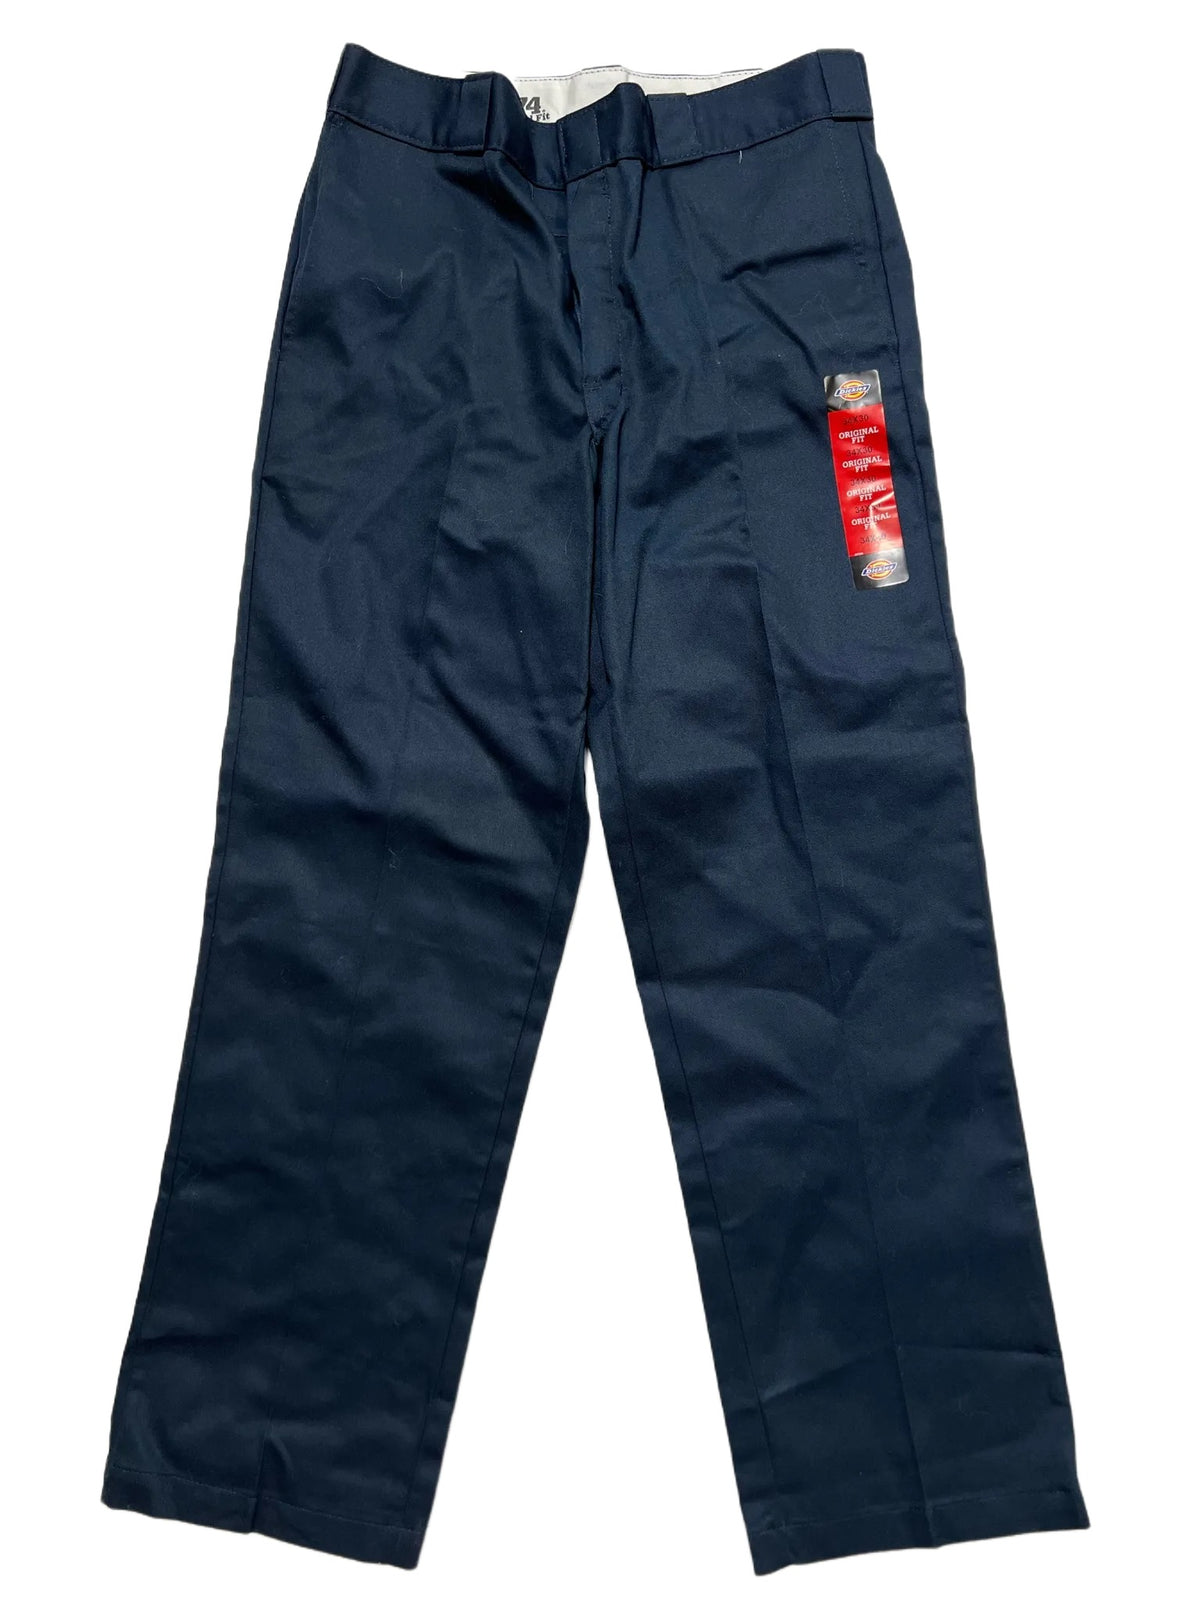 Dickies- Navy Blue Original Fit Pants New With Tags! – DETOURE